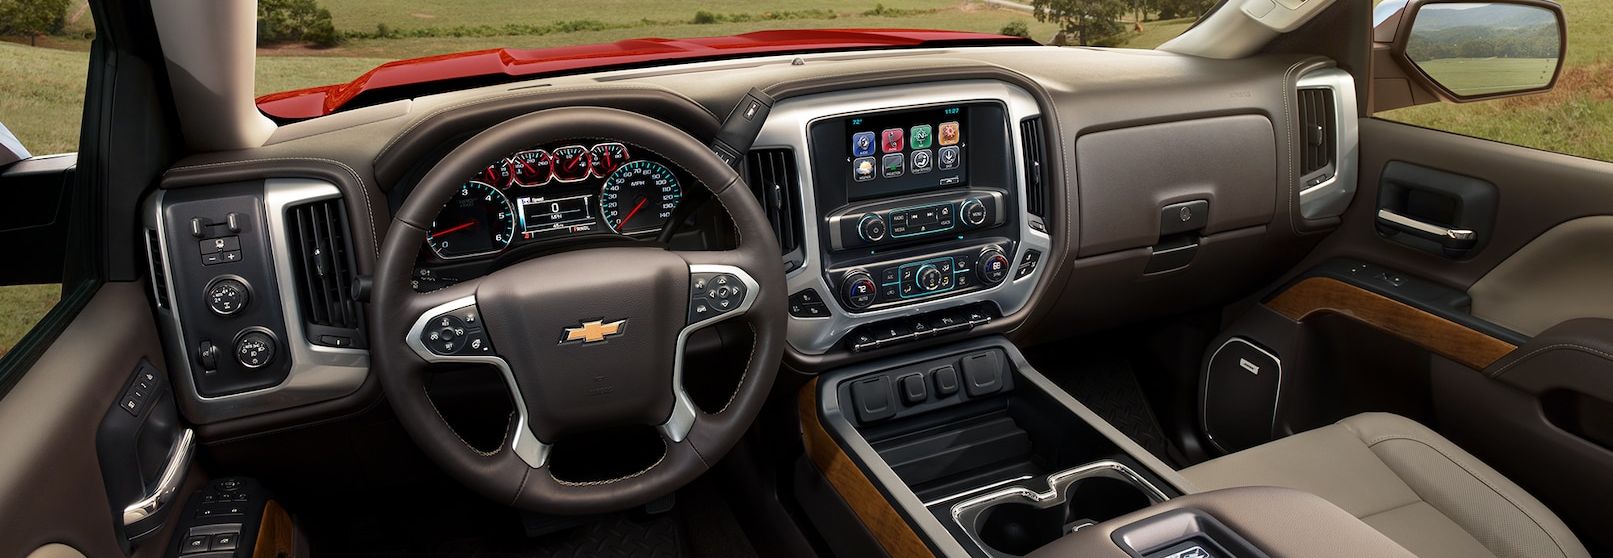 2019 Chevrolet Silverado 1500 For Sale In Youngstown Oh